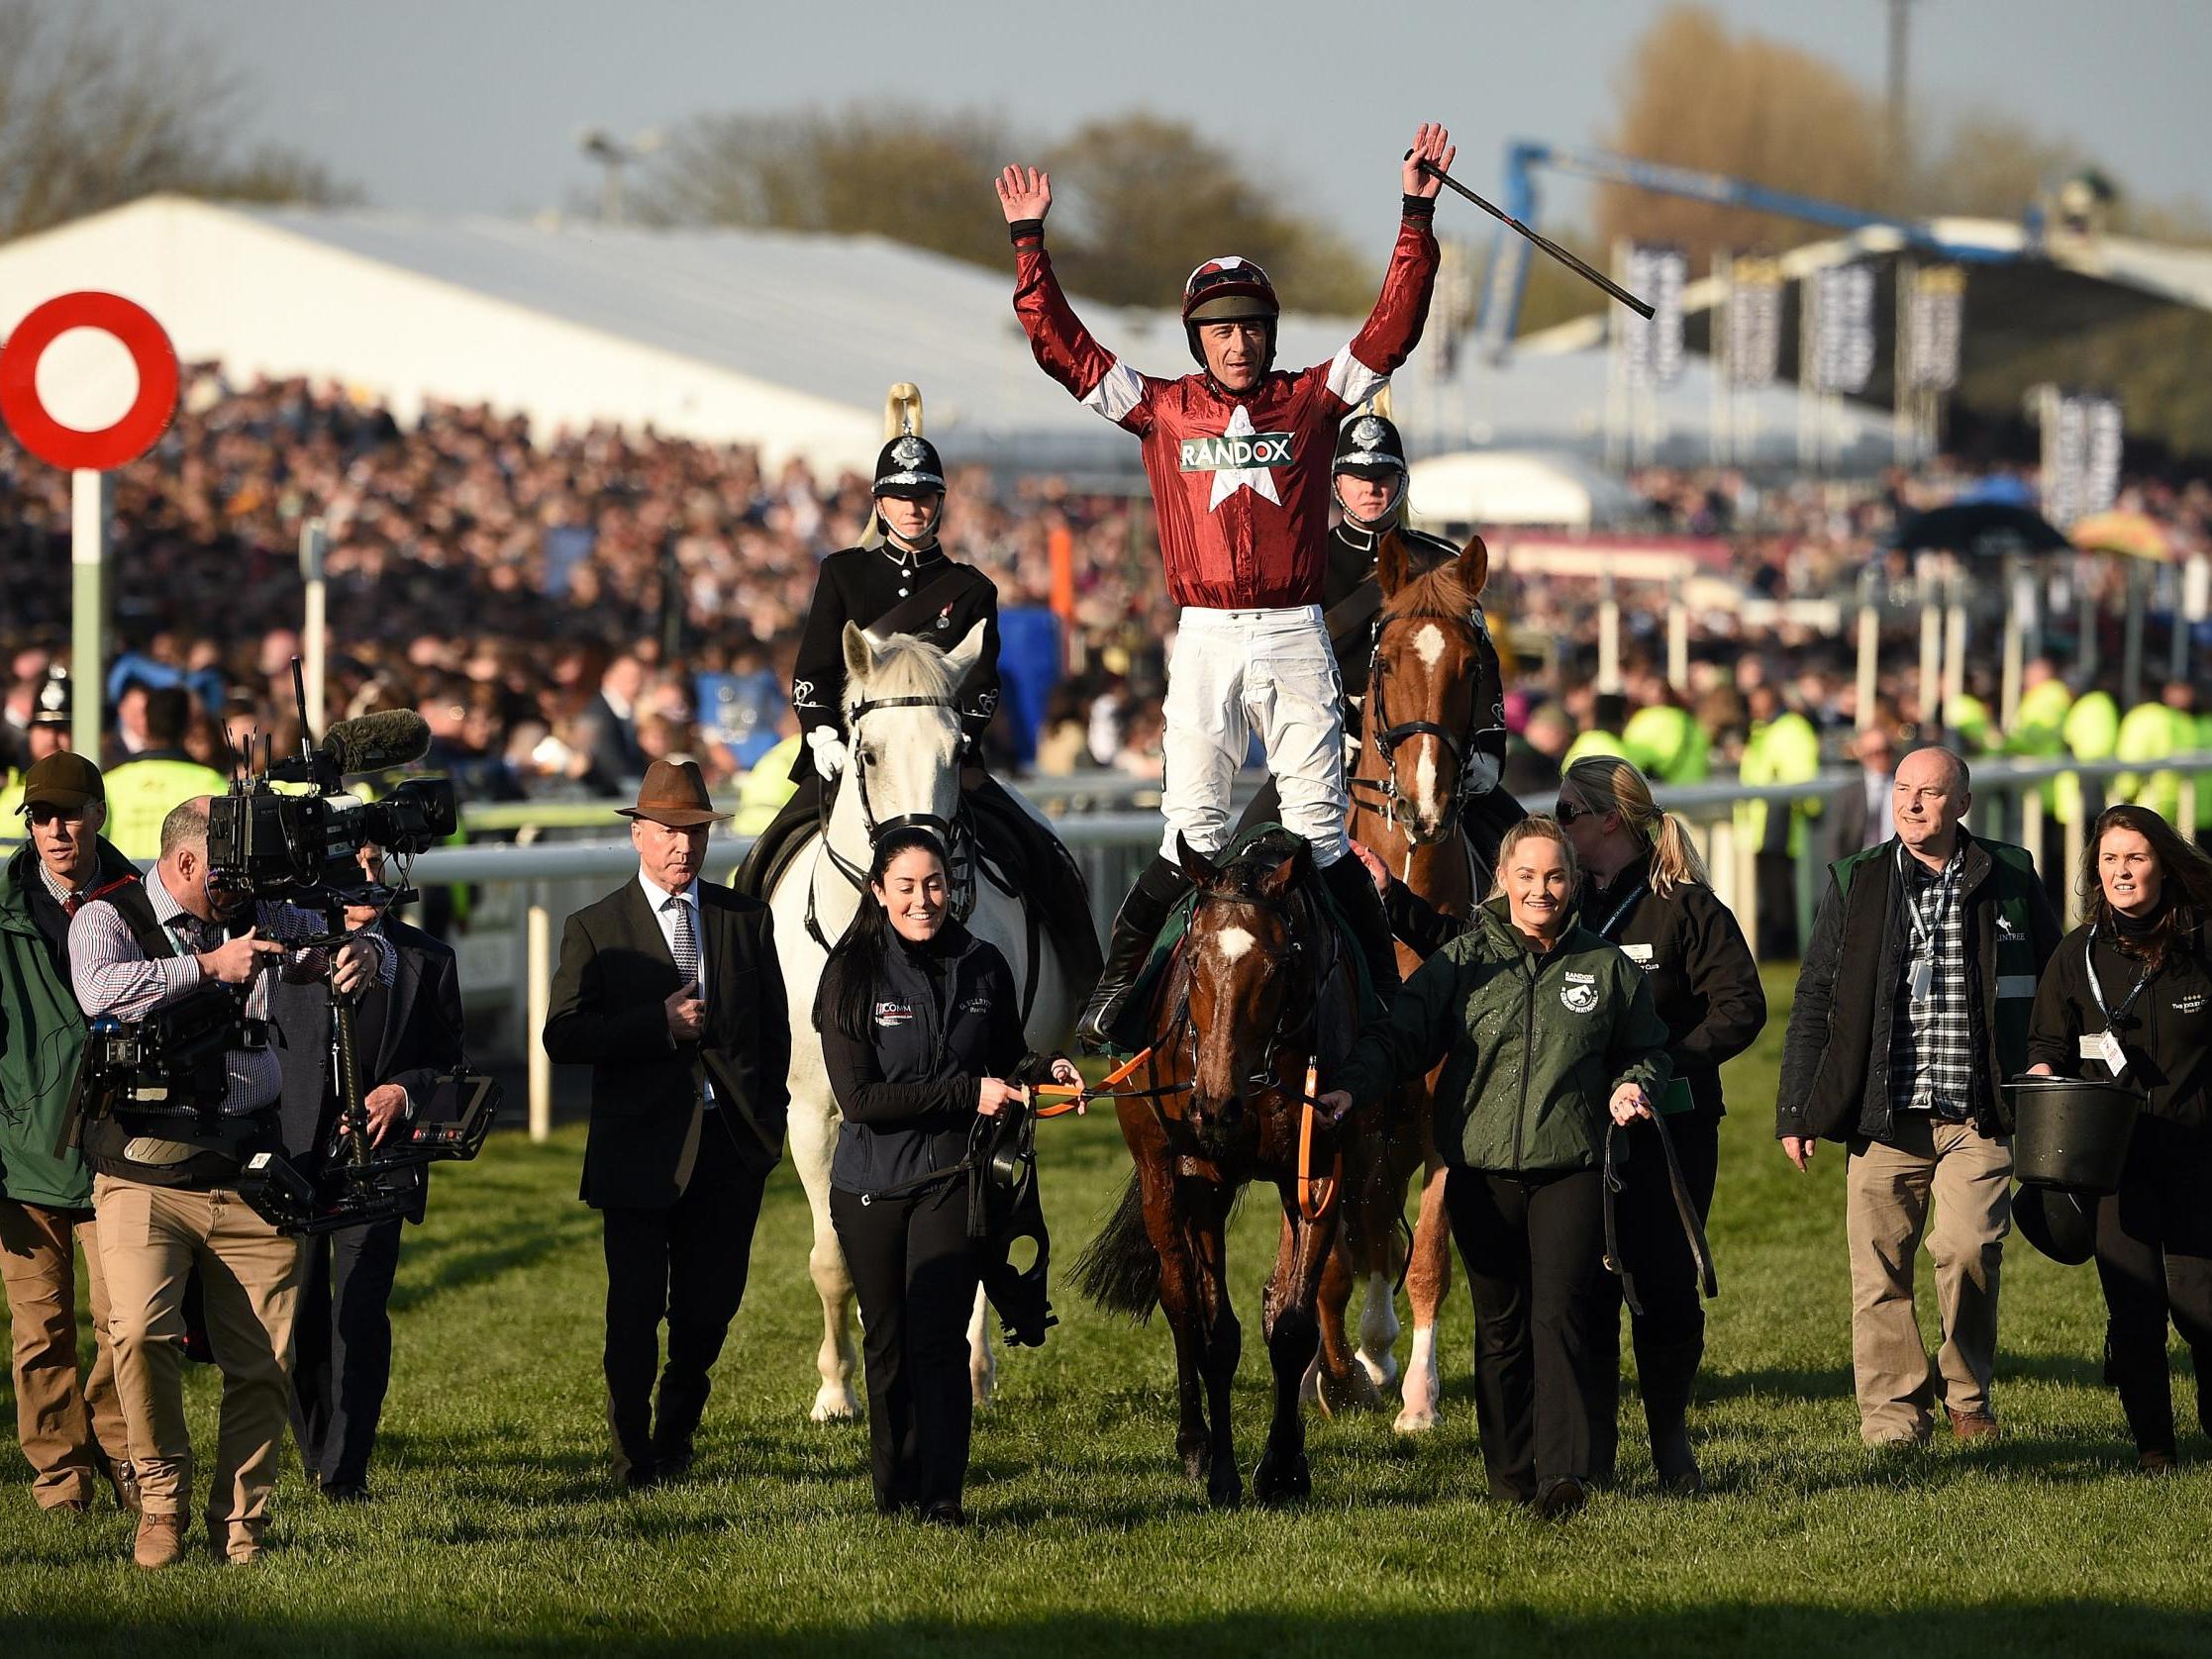 Grand National 2019 result: Tiger Roll storms to second successive victory at Aintree